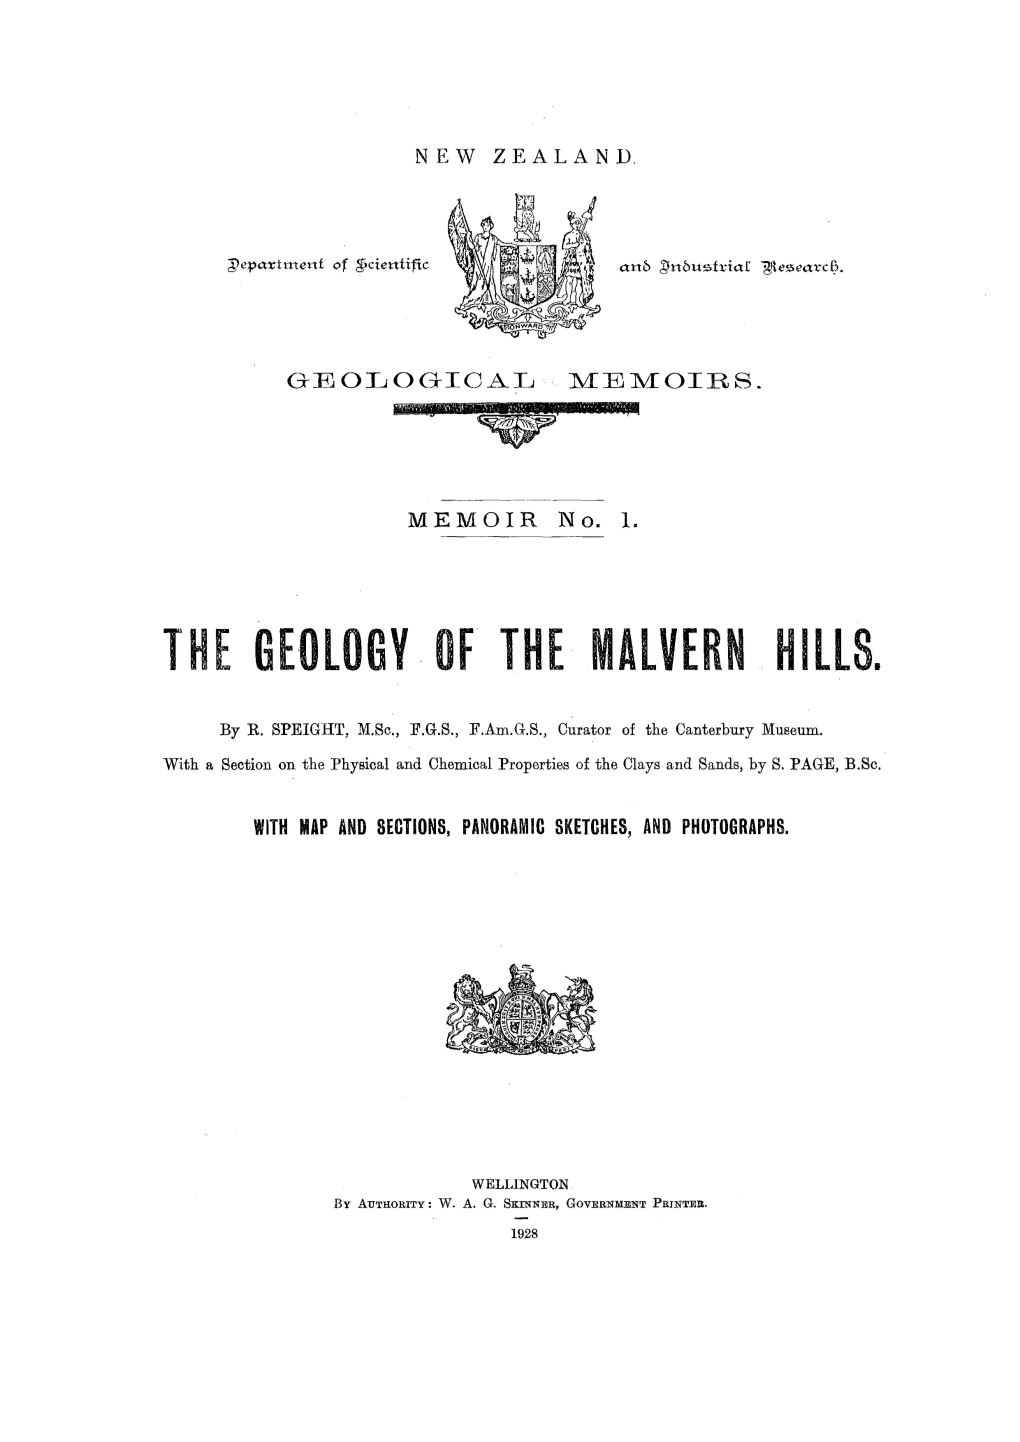 The Geology of the Malvern Hills, with Map and Sections, Panoramic